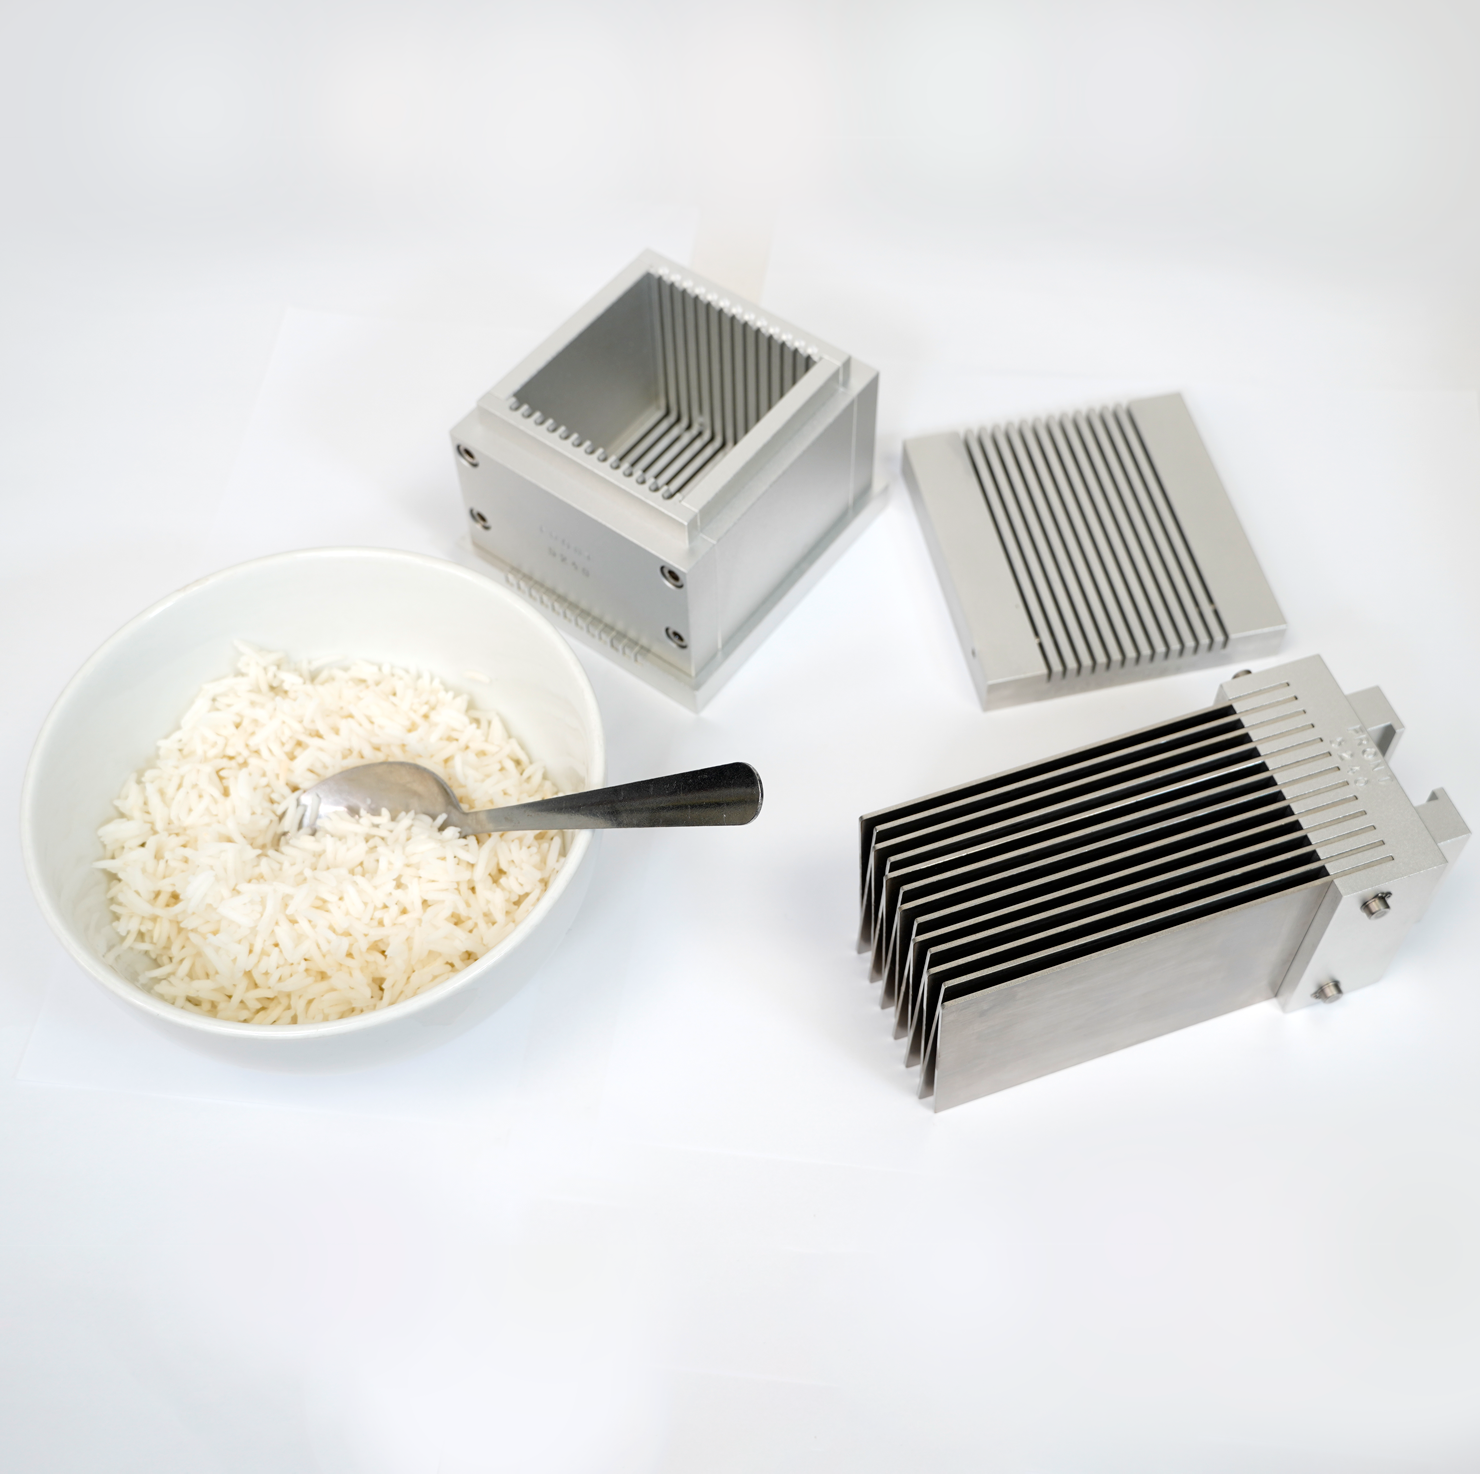 Rice batch sample and thin-blade shear cell fixture for firmness testing